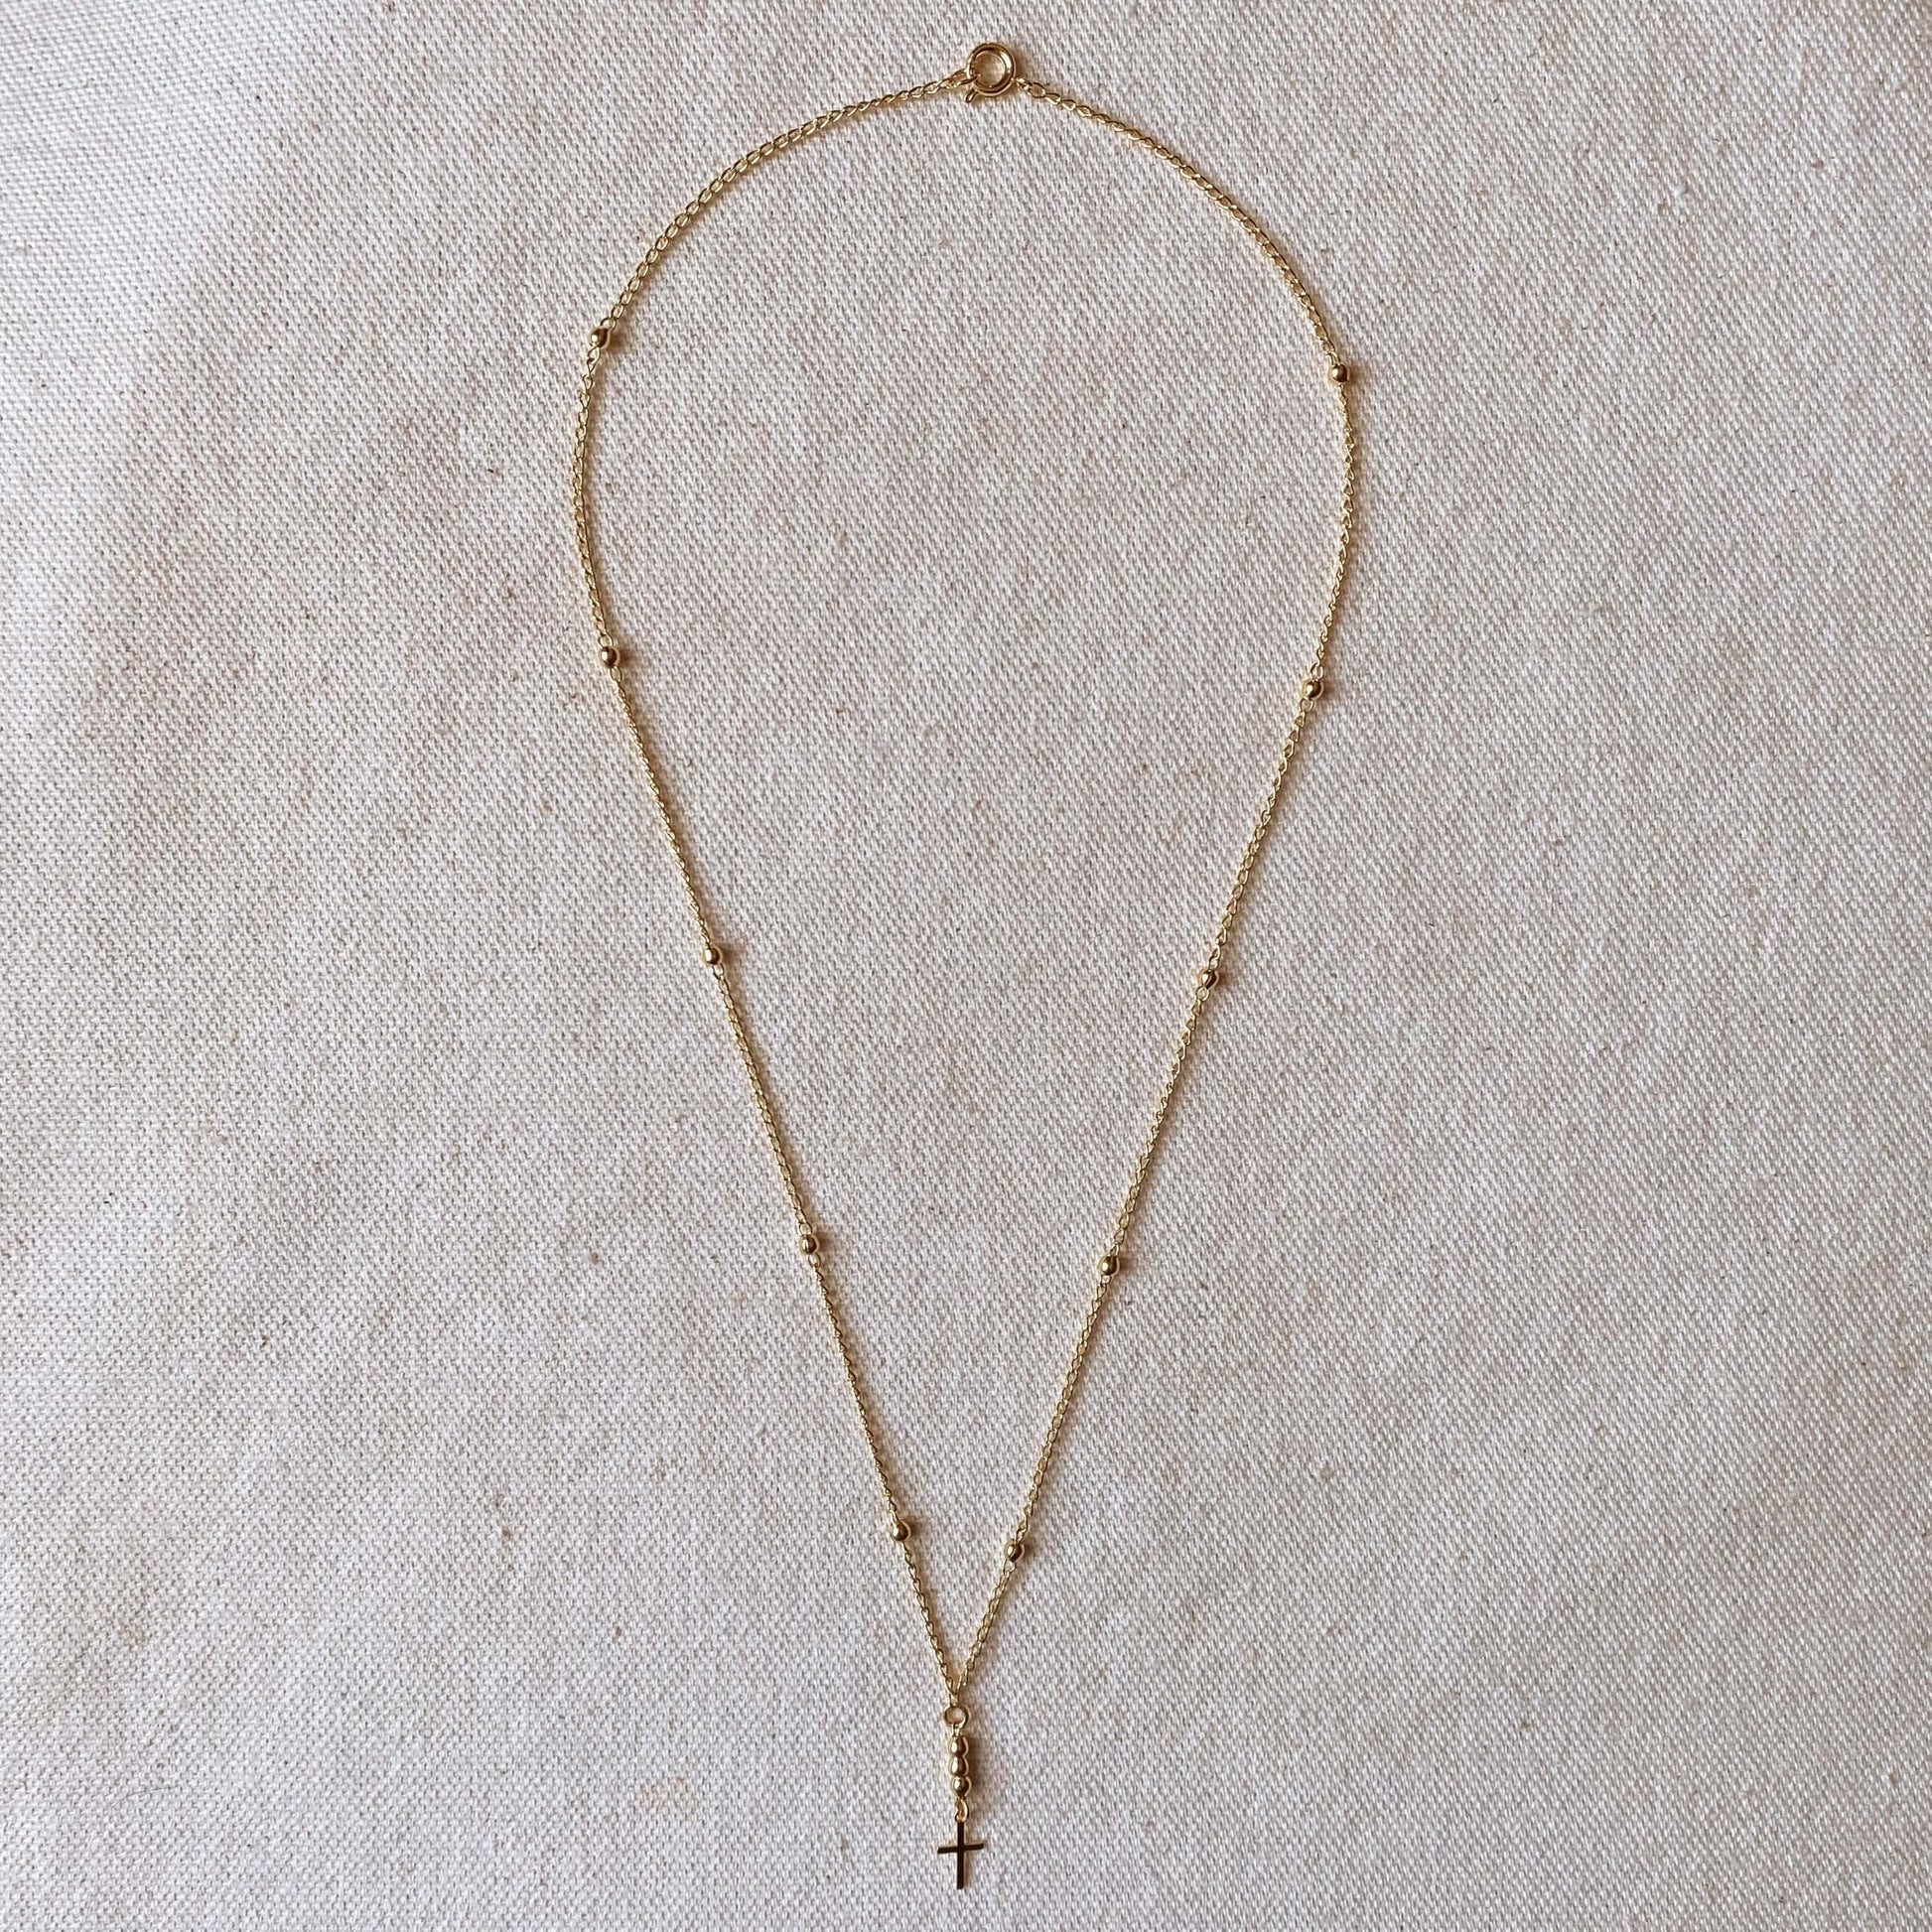 GoldFi 18k Gold Filled Simple Cross Necklace